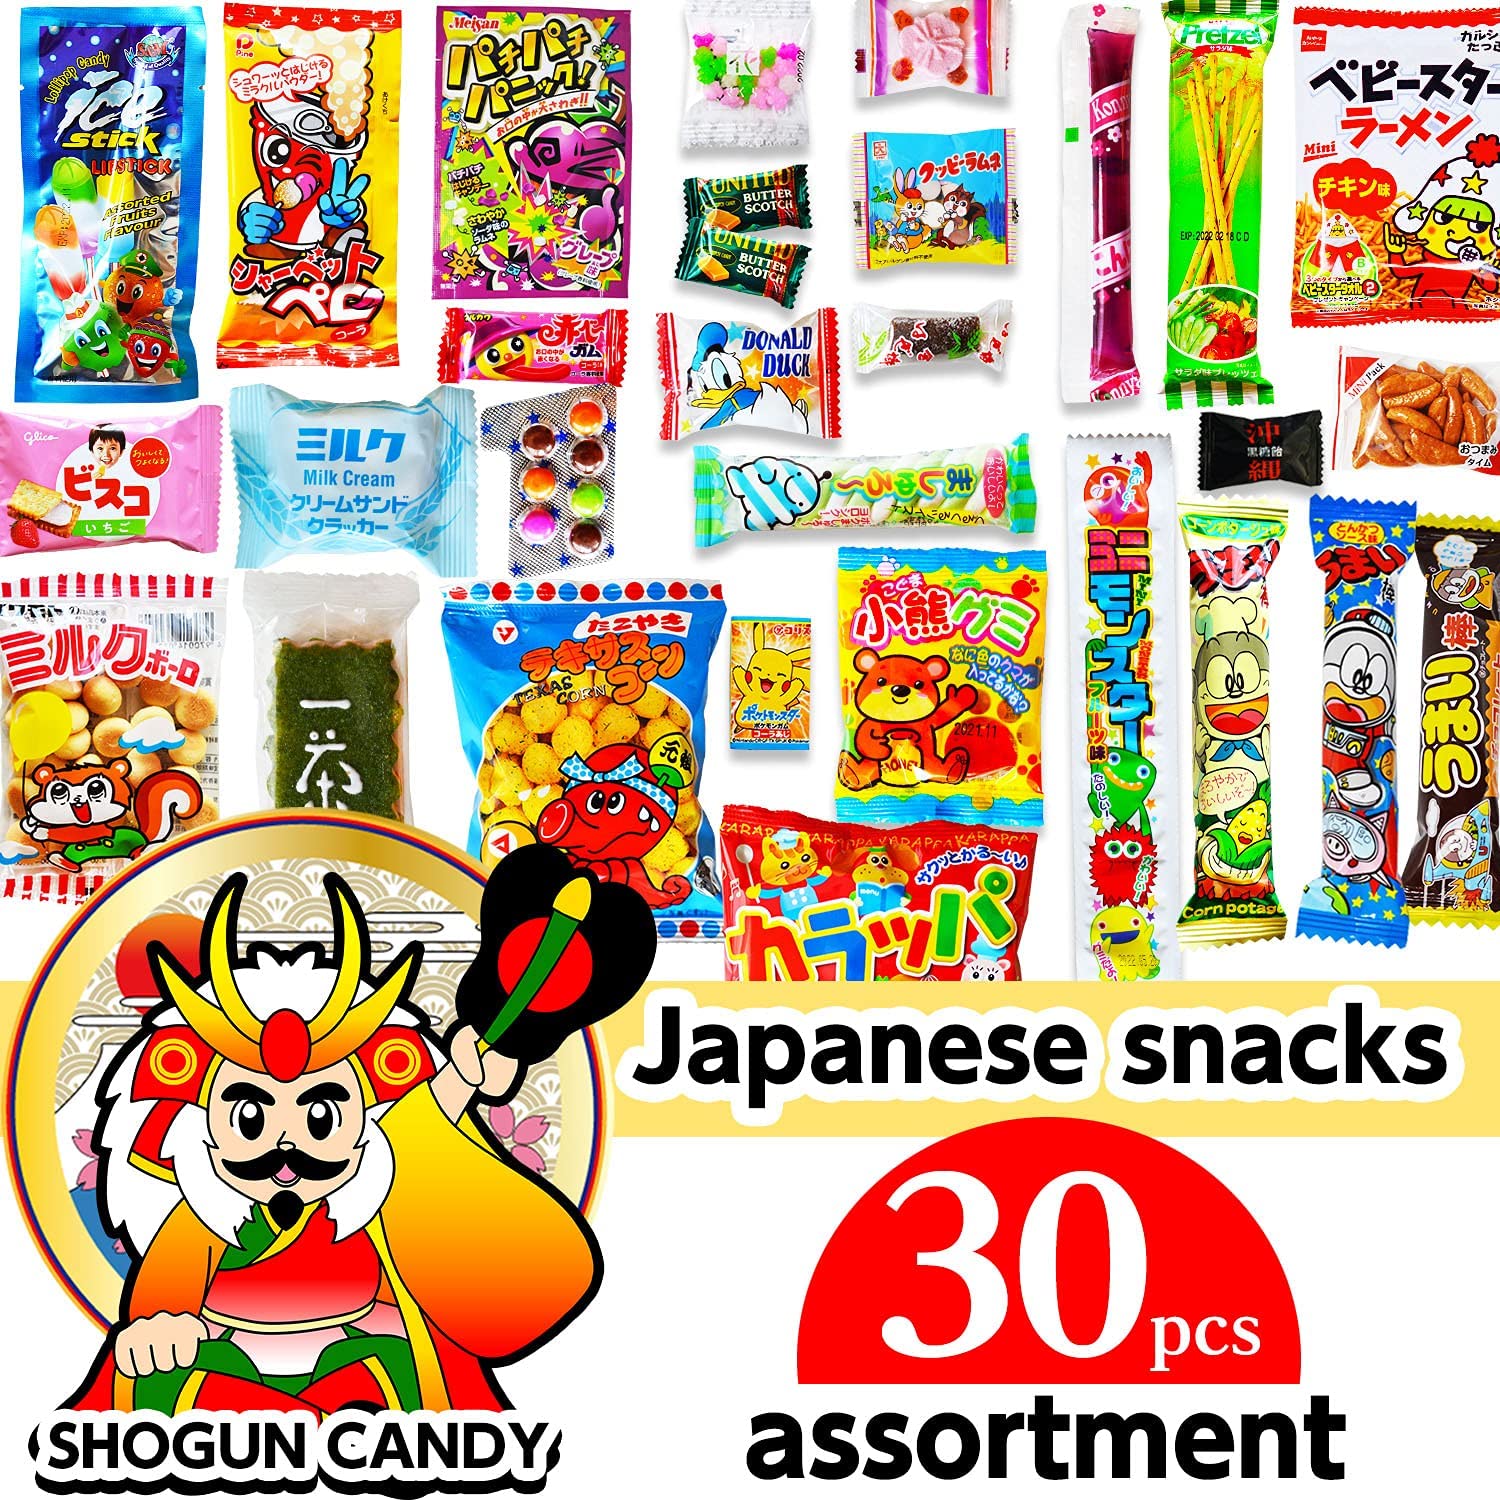 Shogun Candy, Japanese Snacks and Japanese Candy, Popin Cookin Snack Boxes, Kawaii Anime Hime Box, Gluten & Peanuts Free 20 Ounce